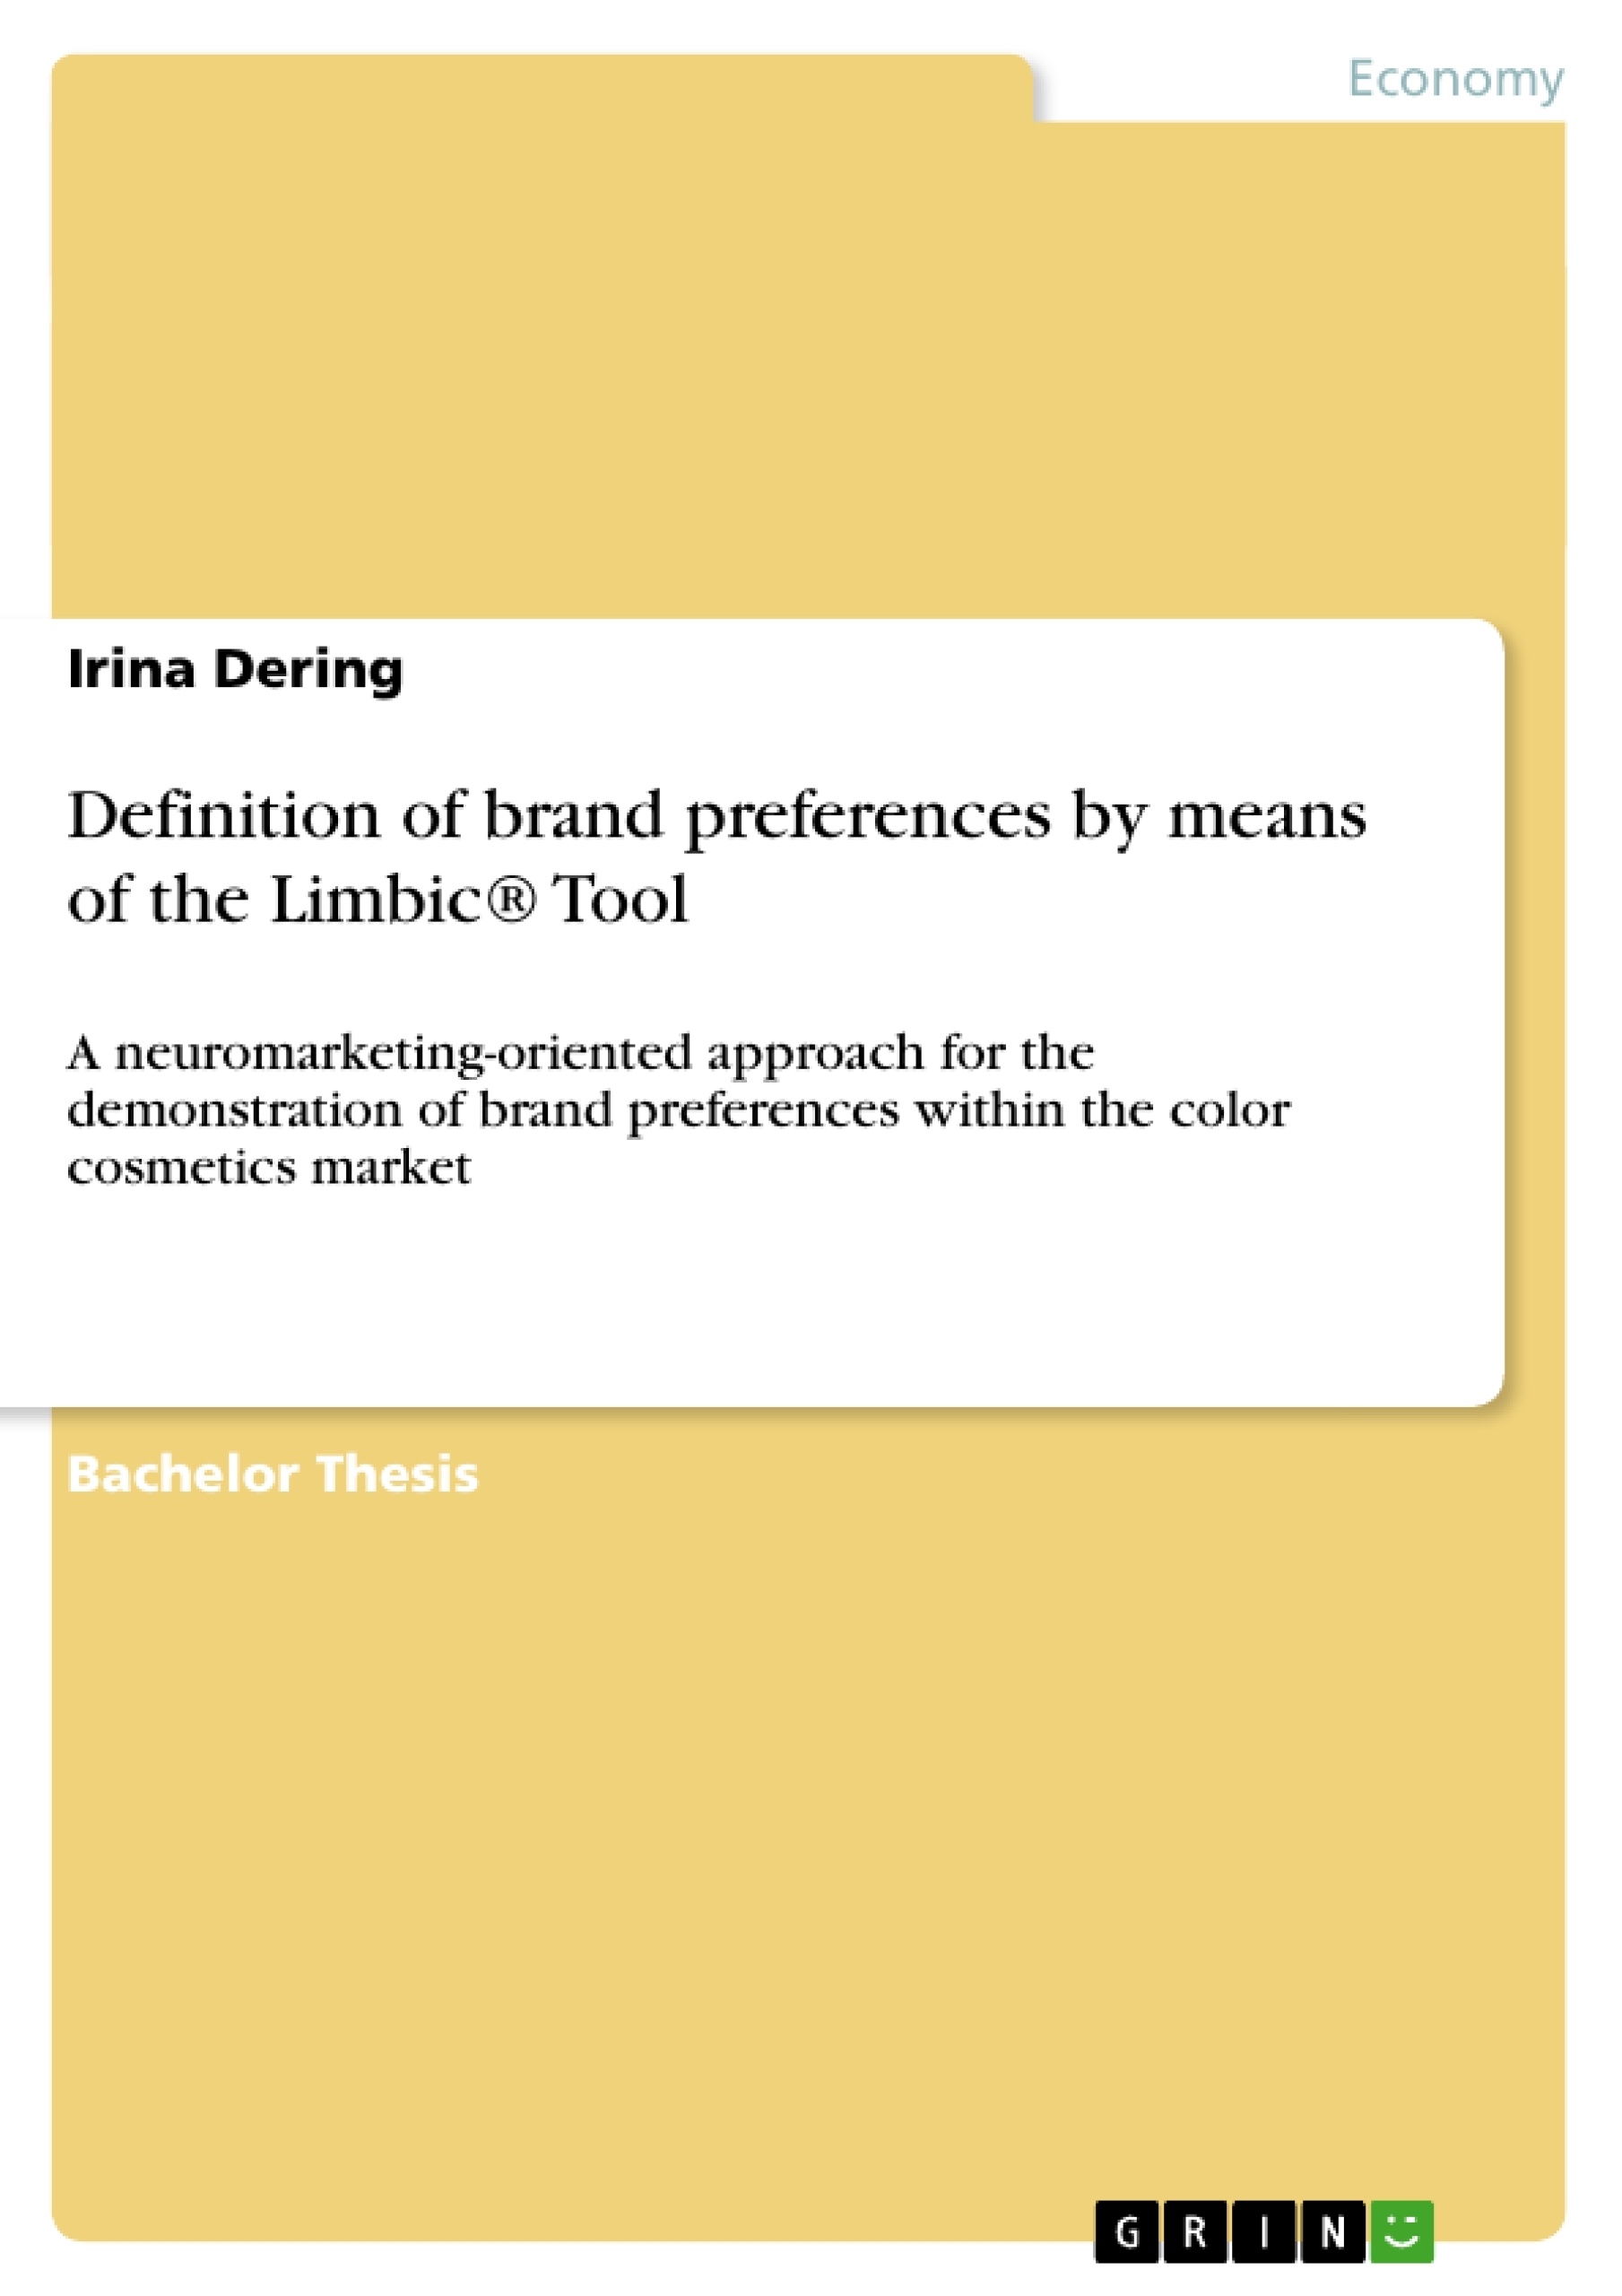 Título: Definition of brand preferences by means of the Limbic® Tool